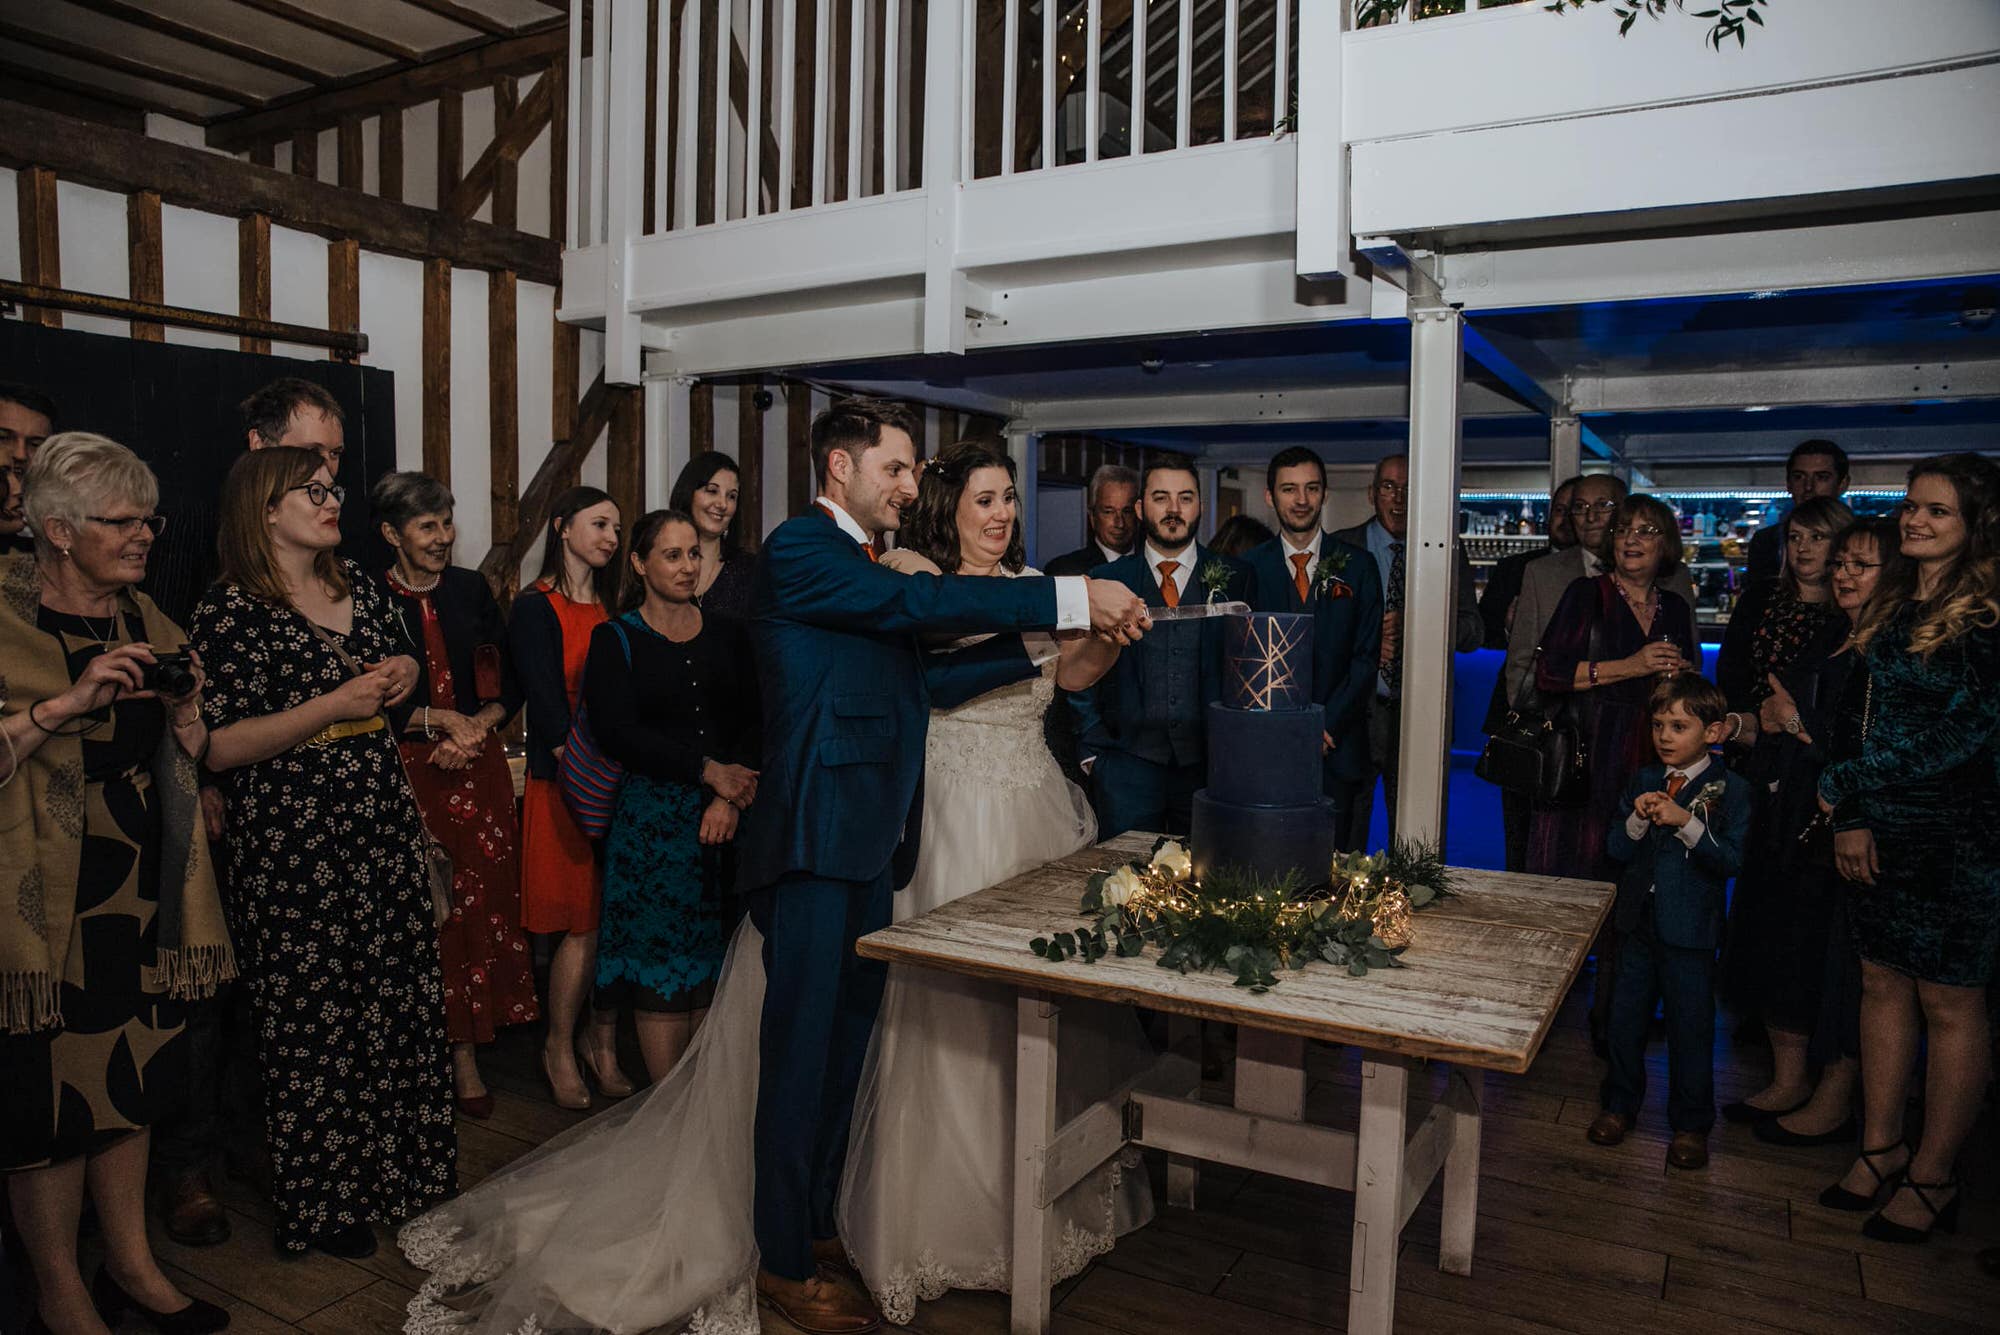 Cake cutting the bride ad groom at the reception Roshni photography The Milling Barn, Bluntswood Hall, Throcking wedding photographer